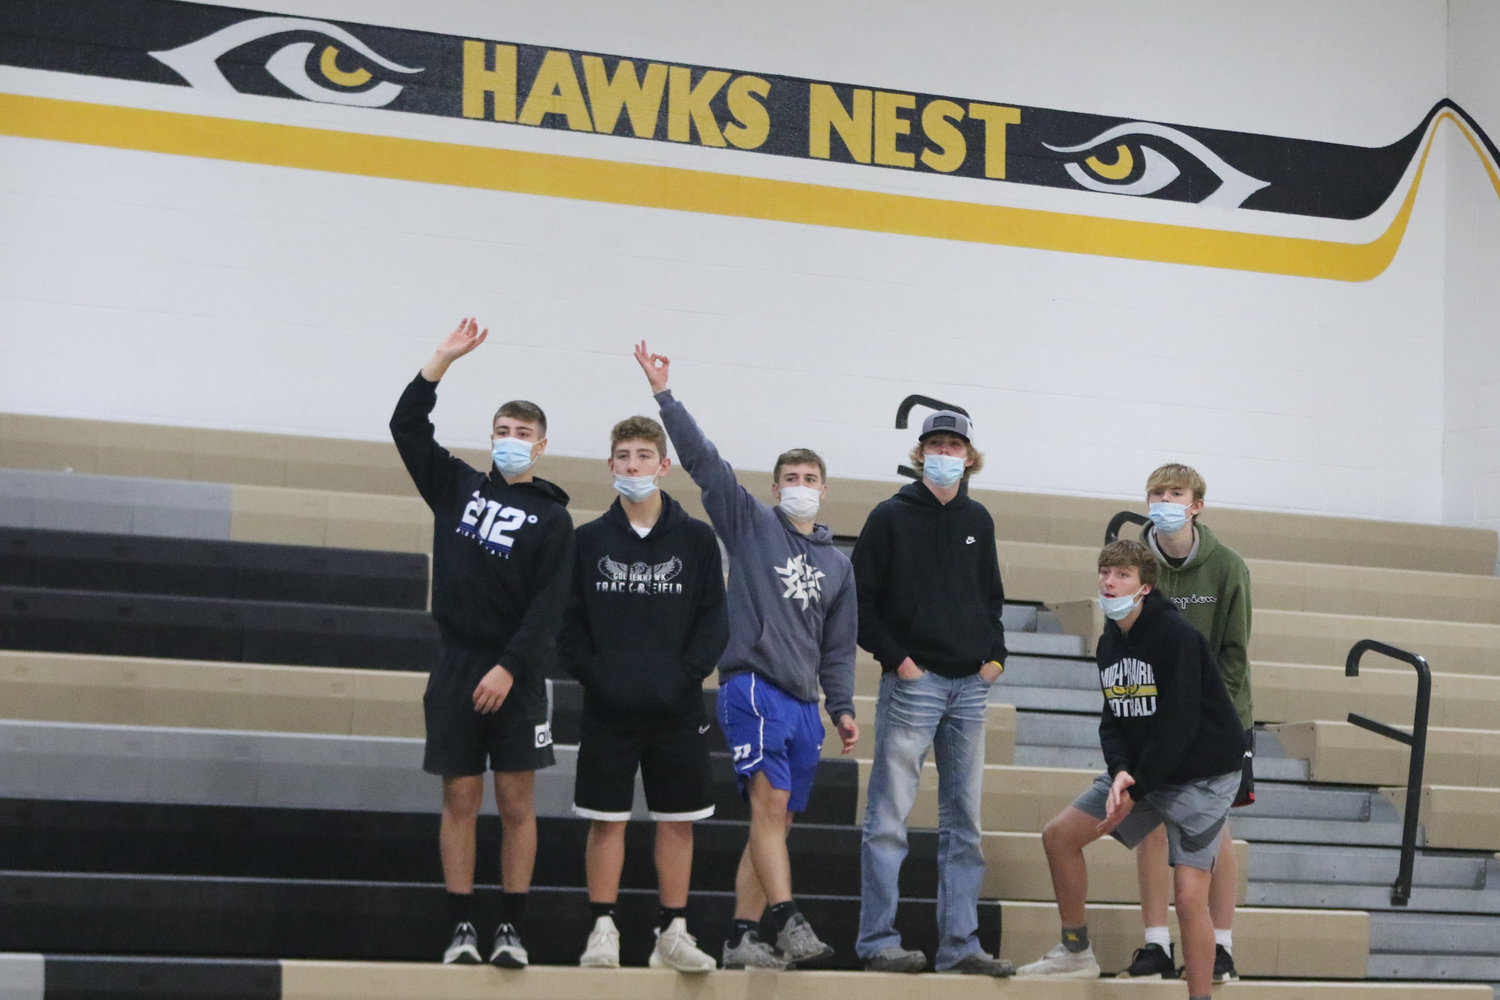 A small student section watches first half action during Mid-Prairie's scrimmage with Mediapolis in Wellman on Saturday, November 21.